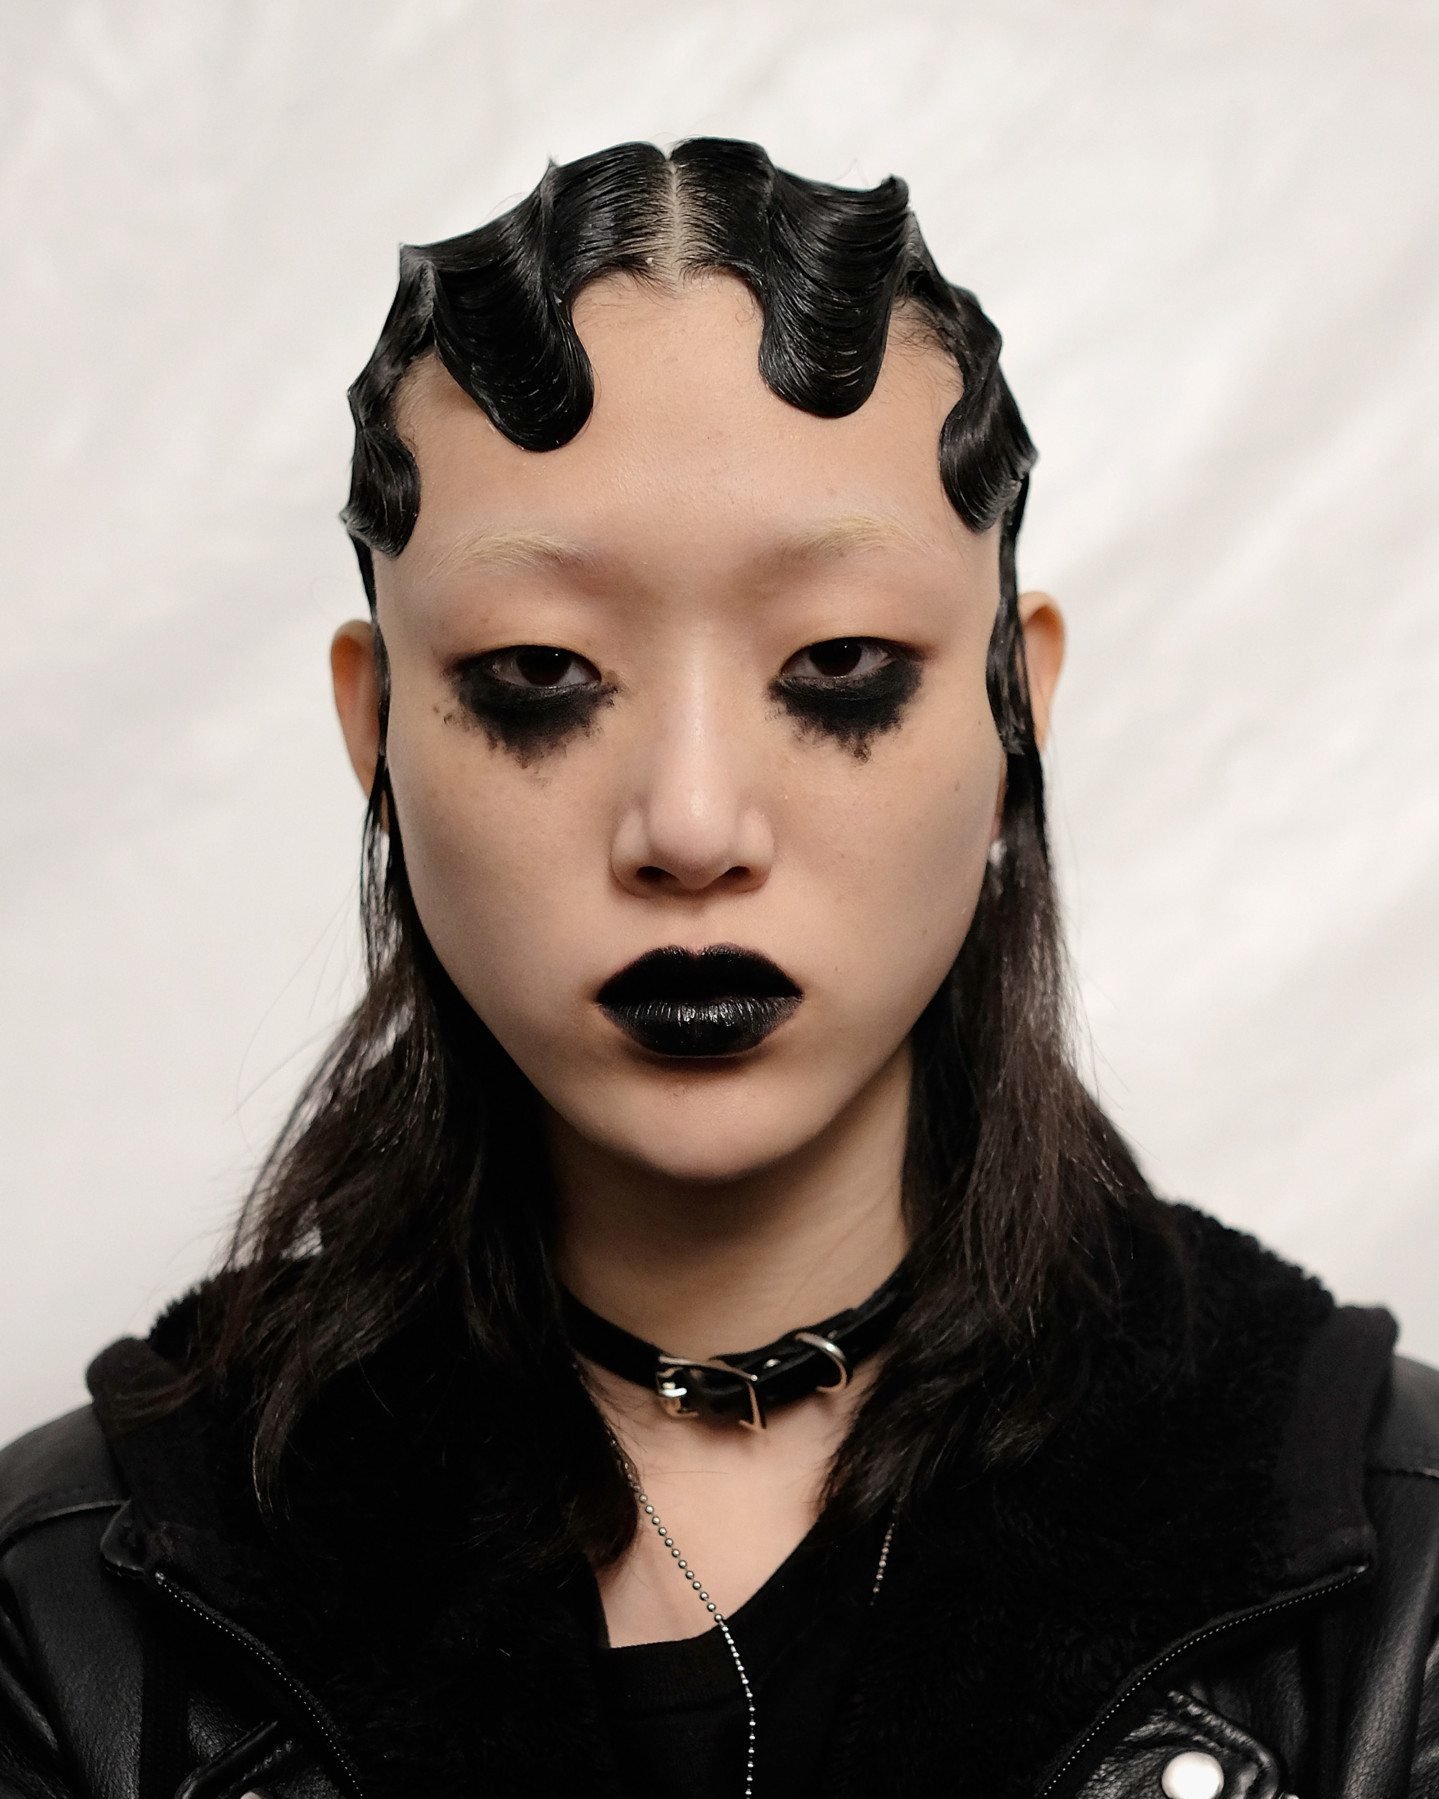 Why Do We Have a Never-Ending Fascination With Goth Makeup? - FASHION ...